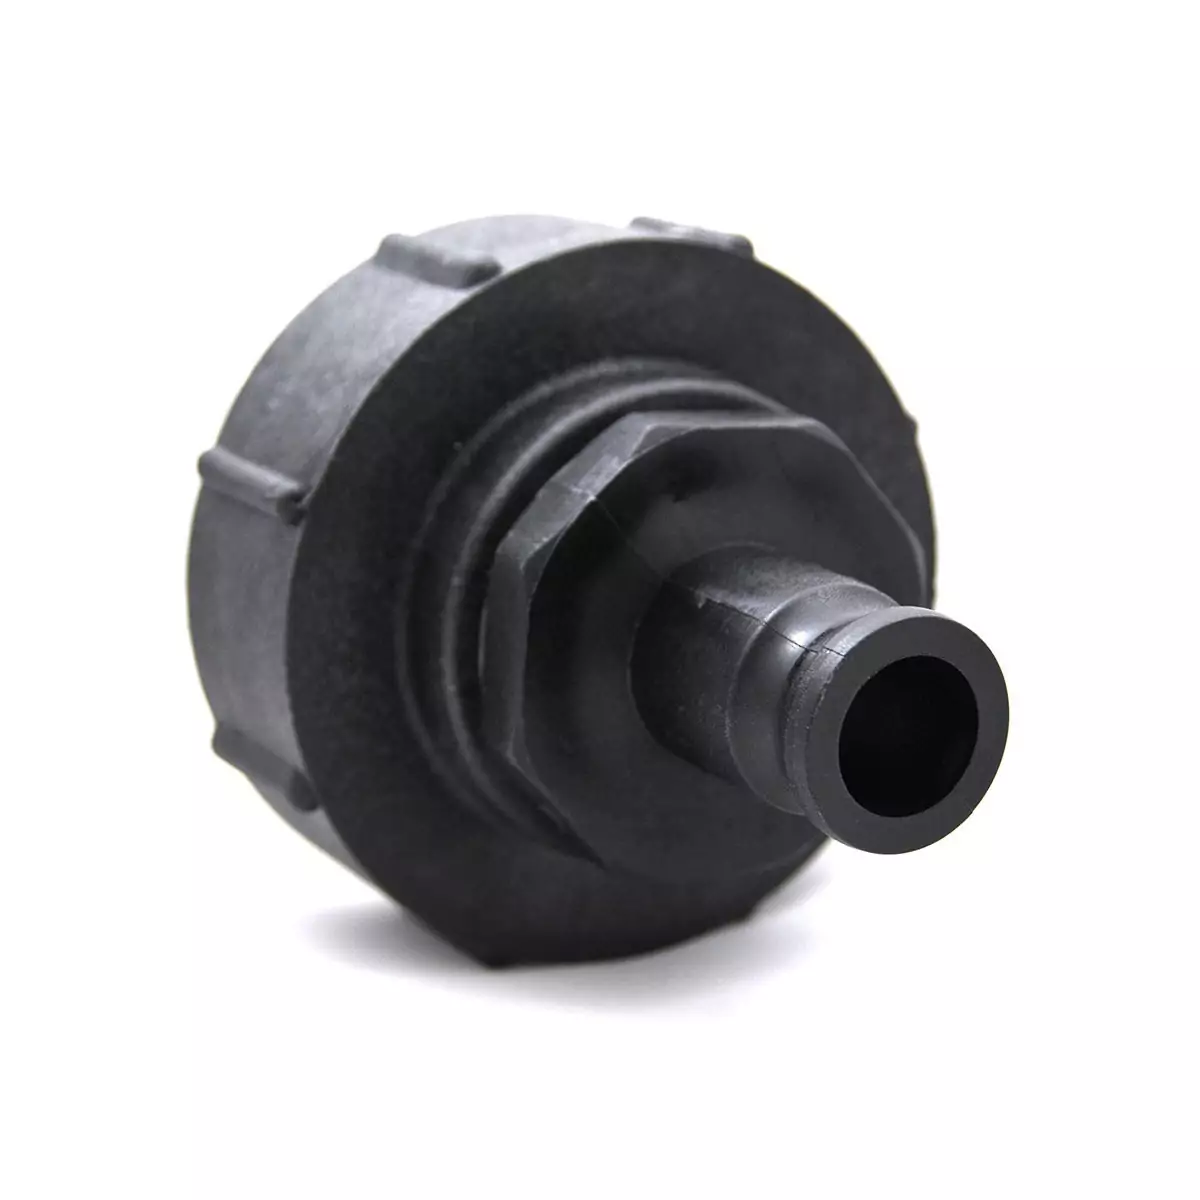 S100x8 female coupling - straight barbed 50mm